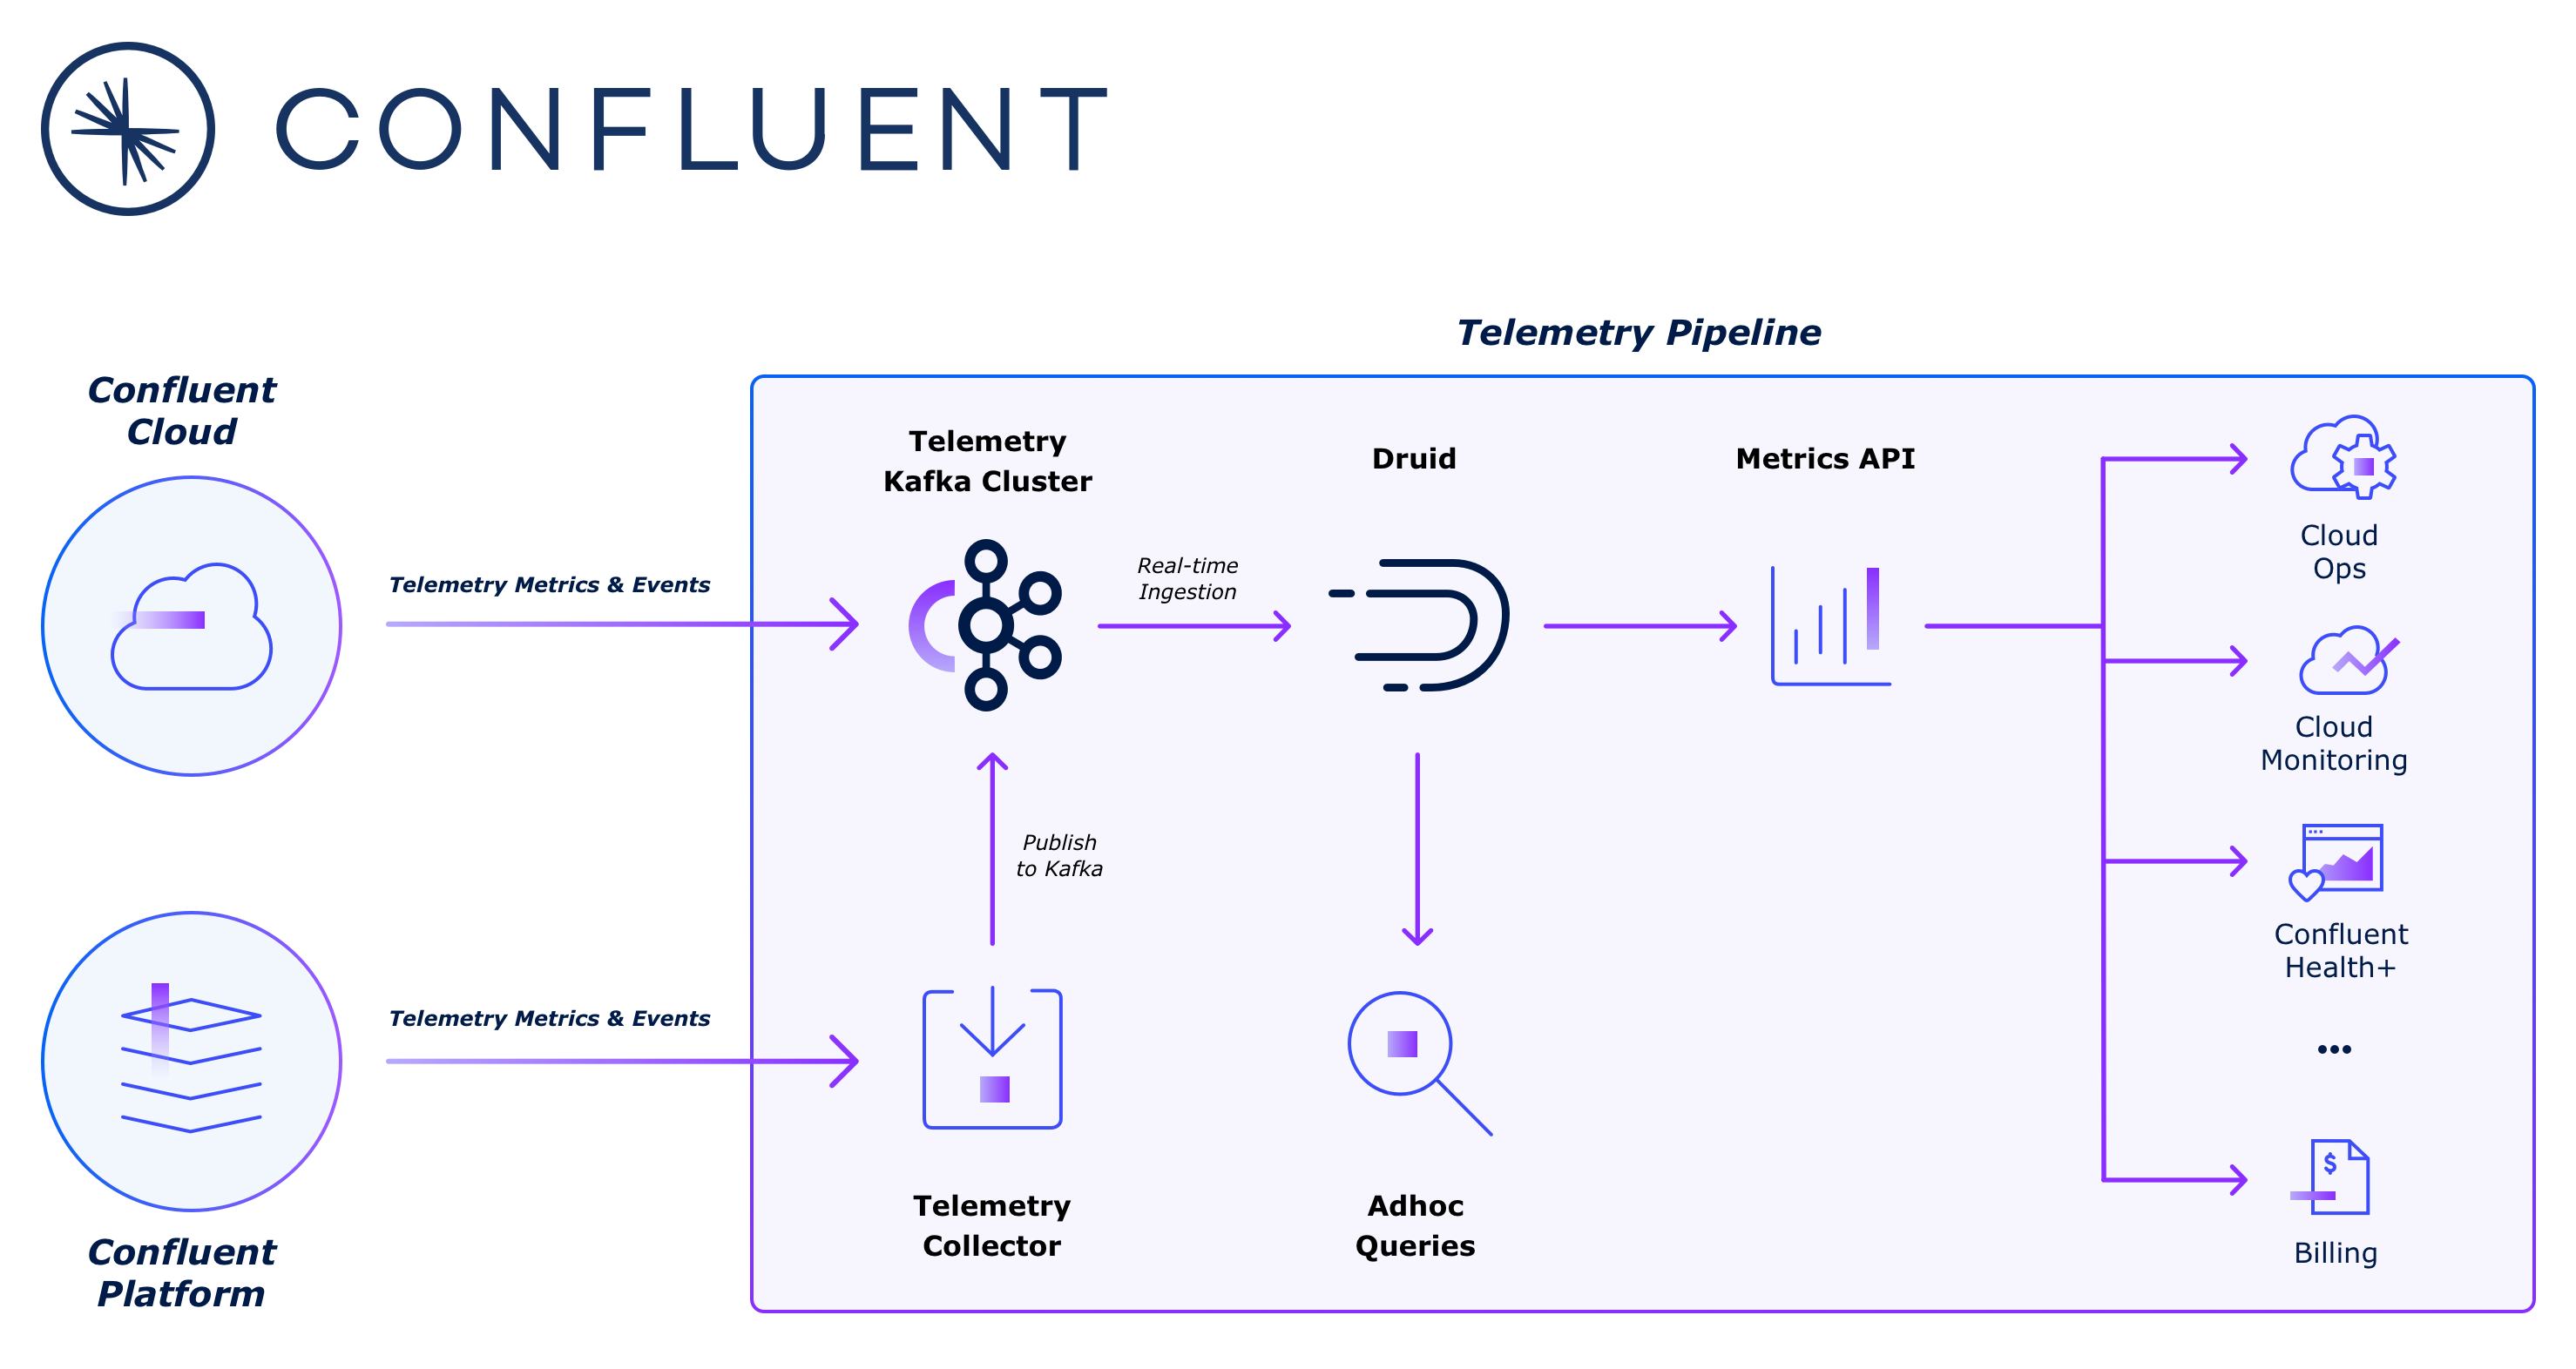 Fig 10: Confluent uses Druid for cloud ops, monitoring, and billing analytics, as well as to power their Confluent Health+ product